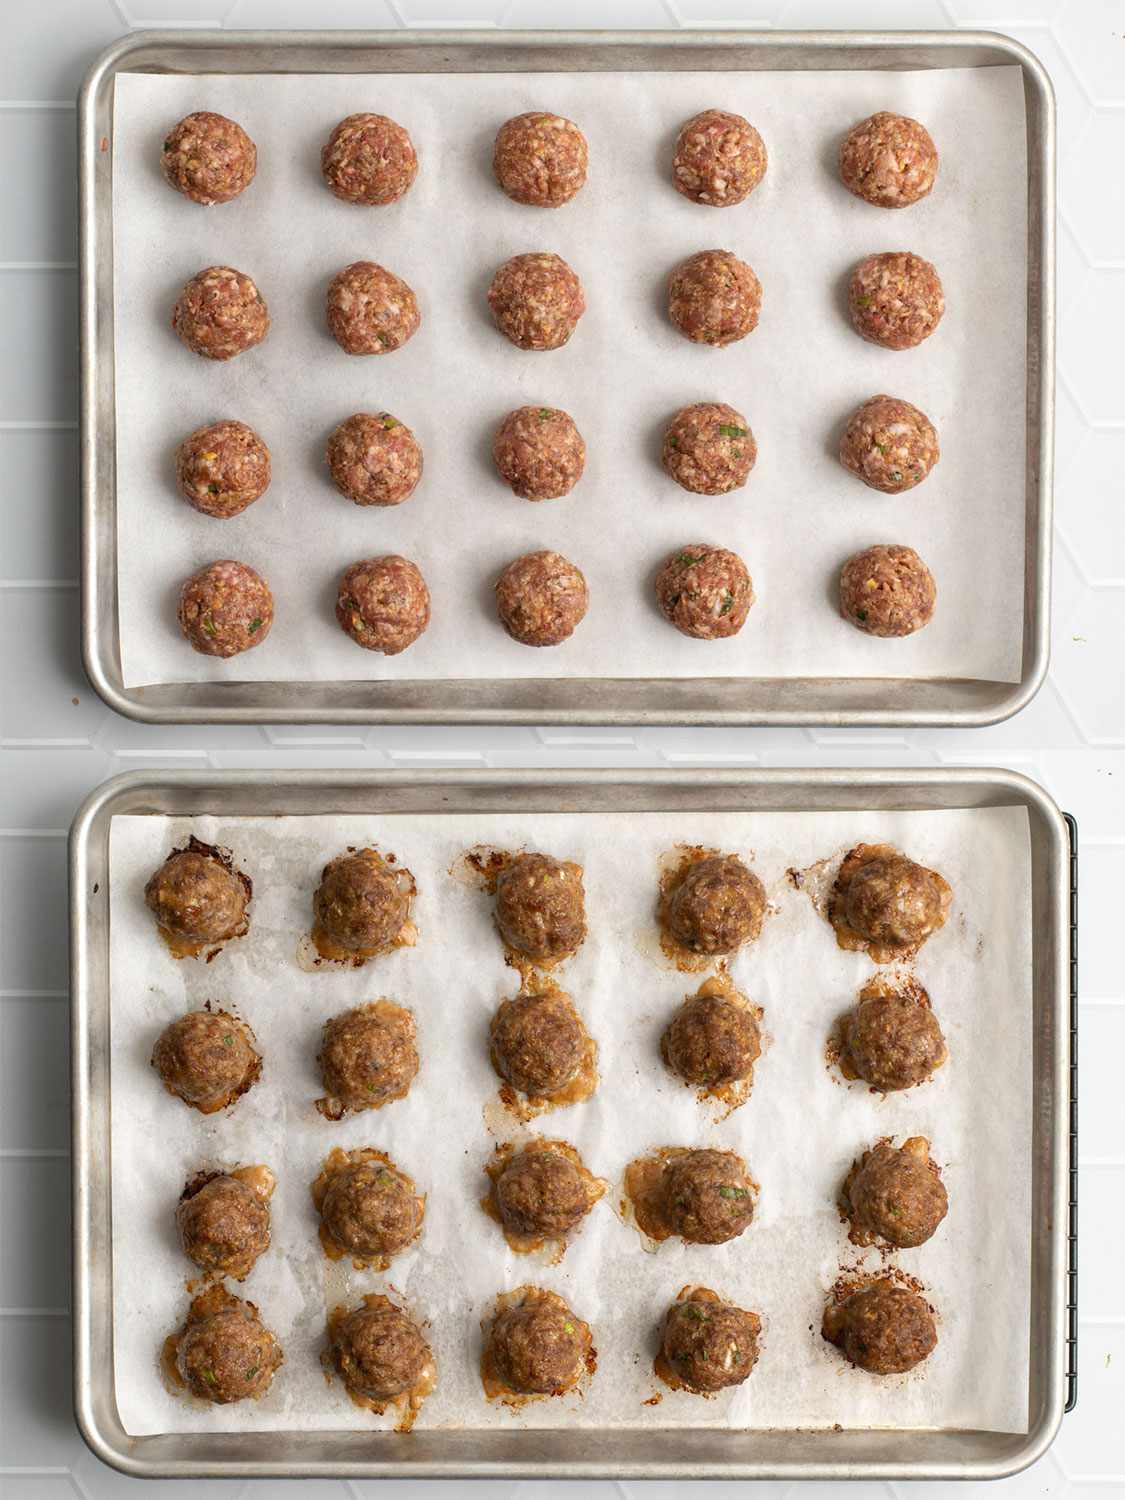 A two-image collage. The top image shows the formed, uncooked meatballs resting on a layer of parchment paper inside of a sheet pan. The bottom image shows the meatballs, now fully cooked, on the same parchment paper inside the baking sheet.